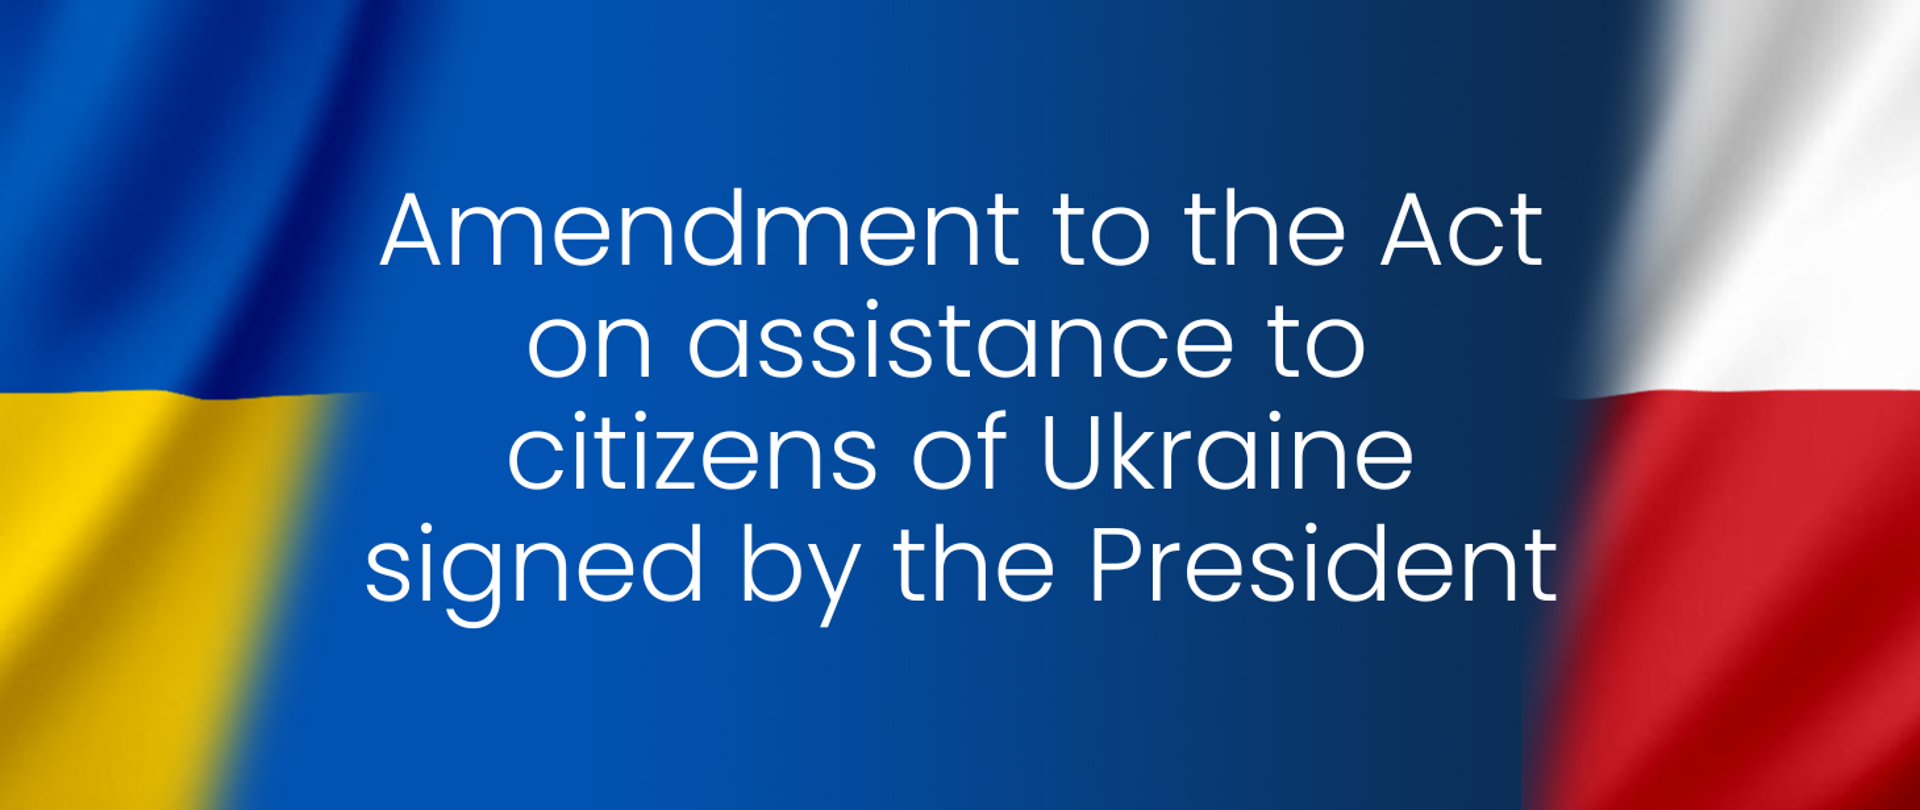 Amendment to the Act on assistance to citizens of Ukraine signed by the President